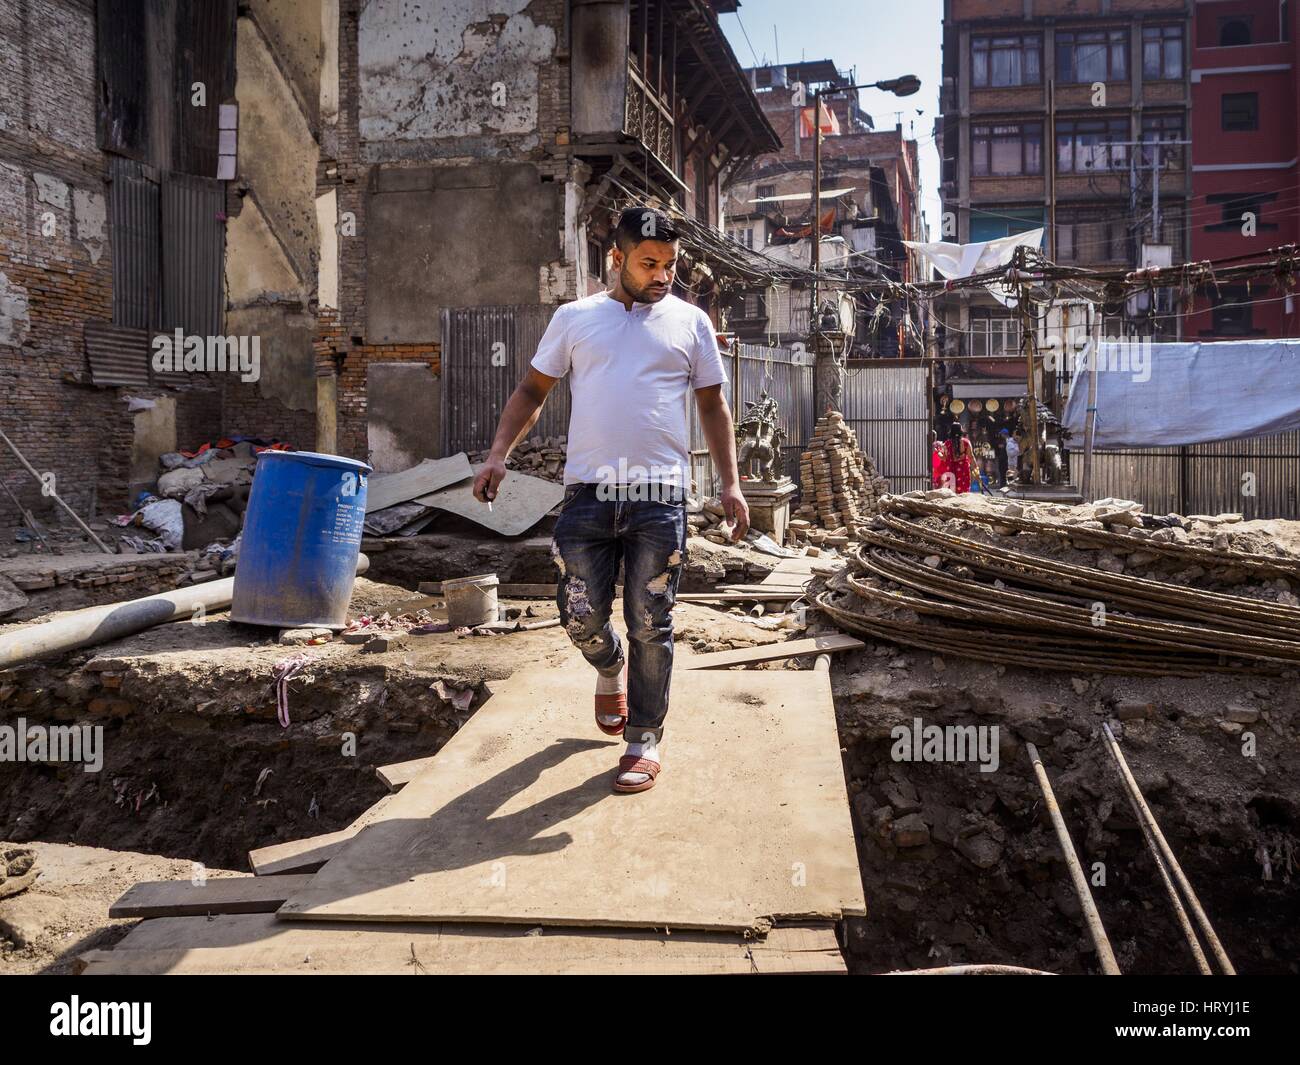 Kathmandu, Central Development Region, Nepal. 5th Mar, 2017. A Nepali man walks through an empty lot being rebuilt after the 2015 earthquake. Much of Kathmandu is now a construction site because of rebuilding two years after the earthquake of 25 April 2015 that devastated Nepal. In some villages in the Kathmandu valley workers are working by hand to remove ruble and dig out destroyed buildings. About 9,000 people were killed and another 22,000 injured by the earthquake. The epicenter of the earthquake was east of the Gorka district. Credit: Jack Kurtz/ZUMA Wire/Alamy Live News Stock Photo